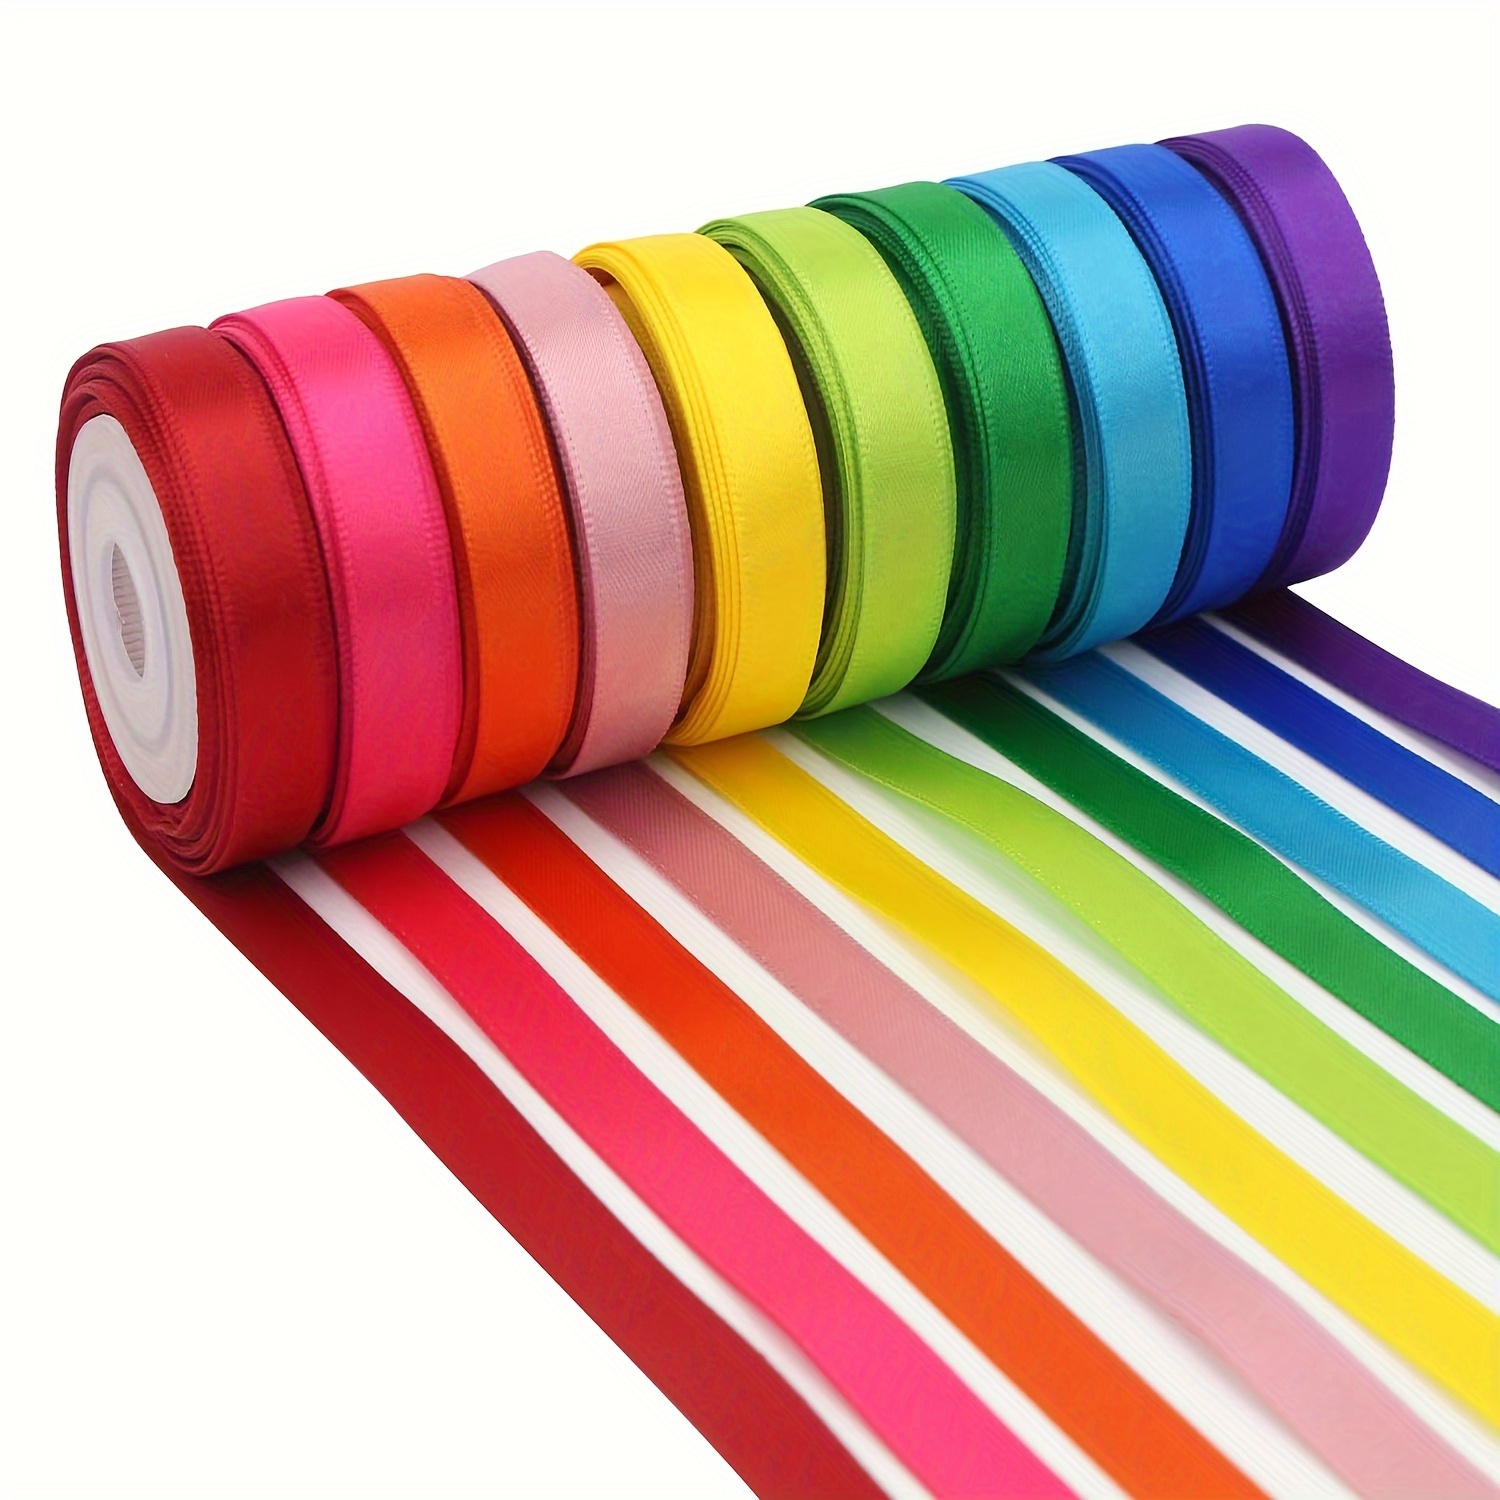 

Buy More Save More! 6/10-piece Vibrant Rainbow Satin Ribbons, 3/8” X 25 Yards Each - Perfect For Gift Wrapping, Birthday & Wedding Decorations, Party Invitations, And Diy Crafts